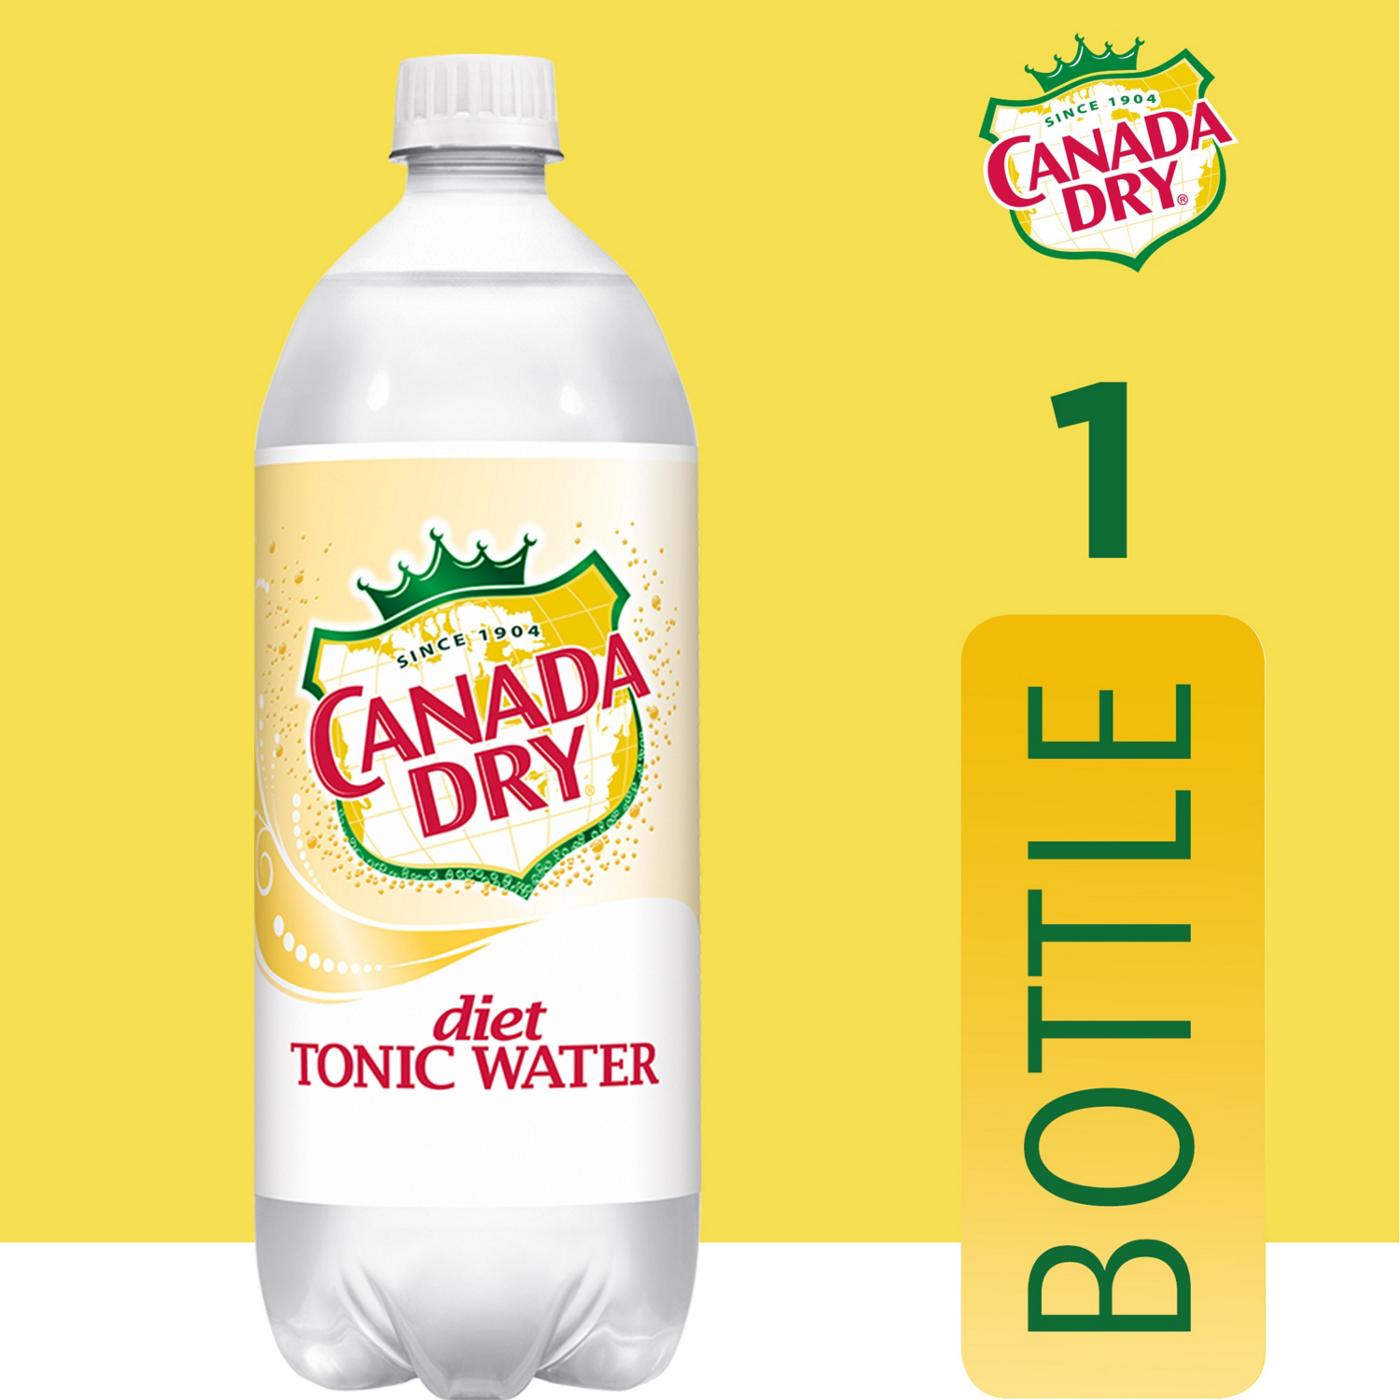 Canada Dry Diet Tonic Water; image 2 of 2